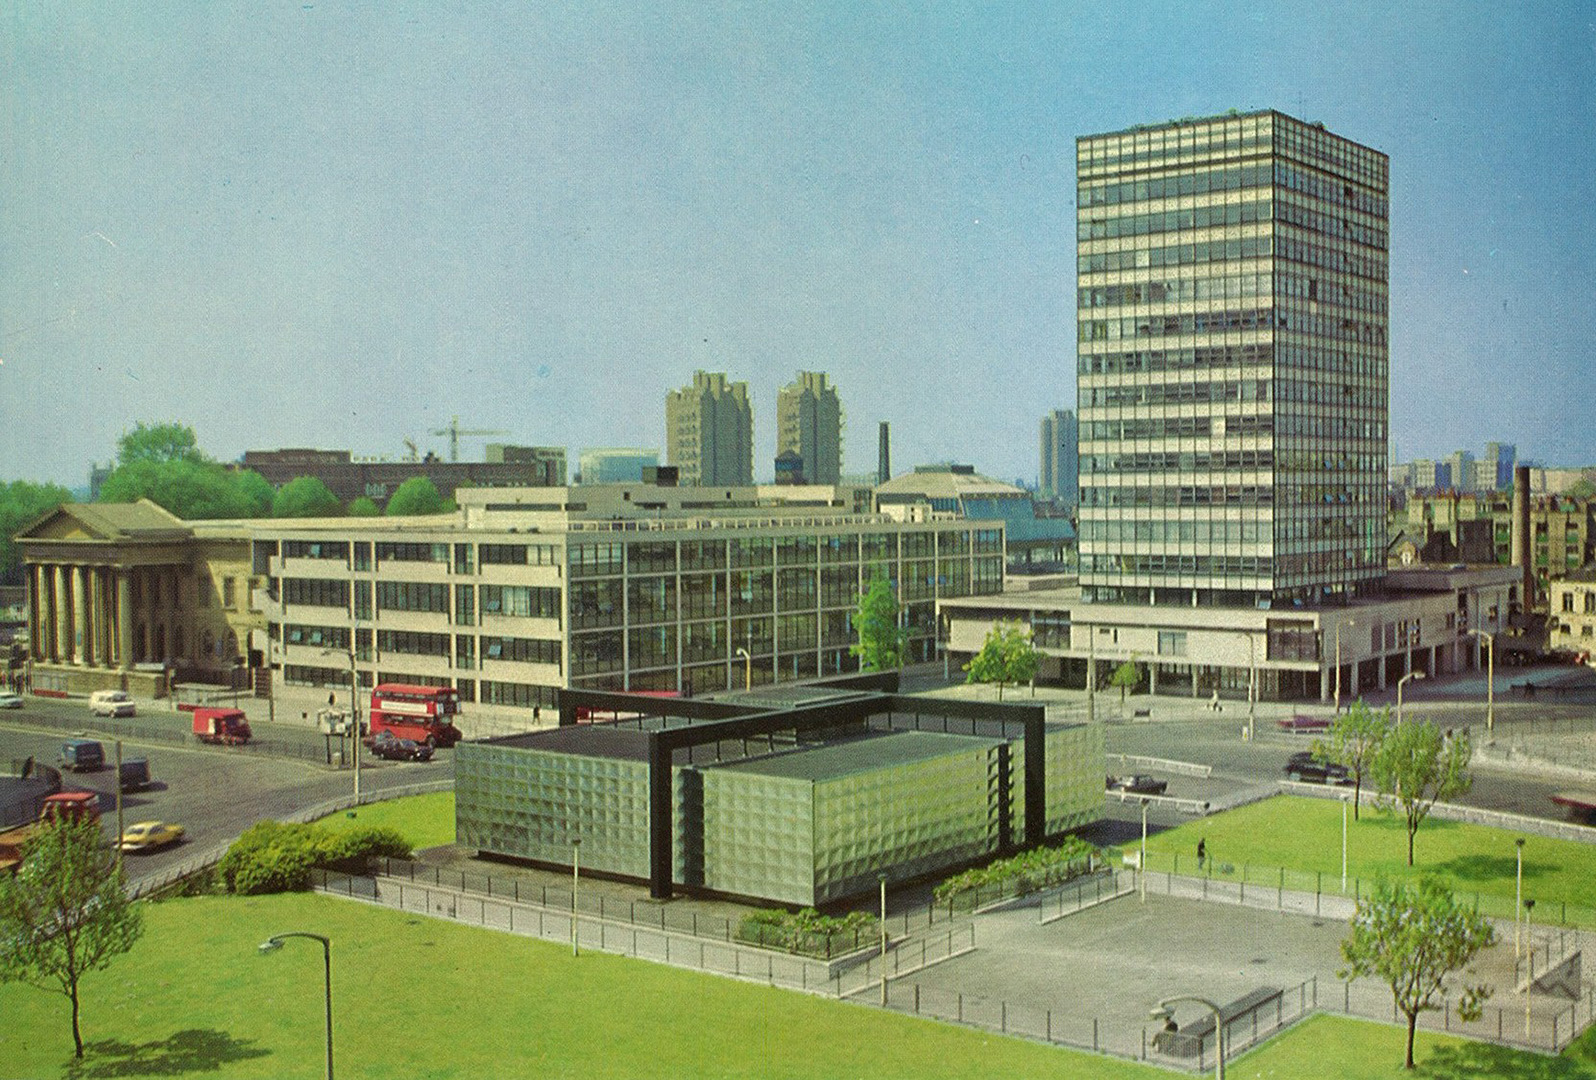 Colour artist impression of the new London College of Printing at Elephant and Castle, dated 1961.